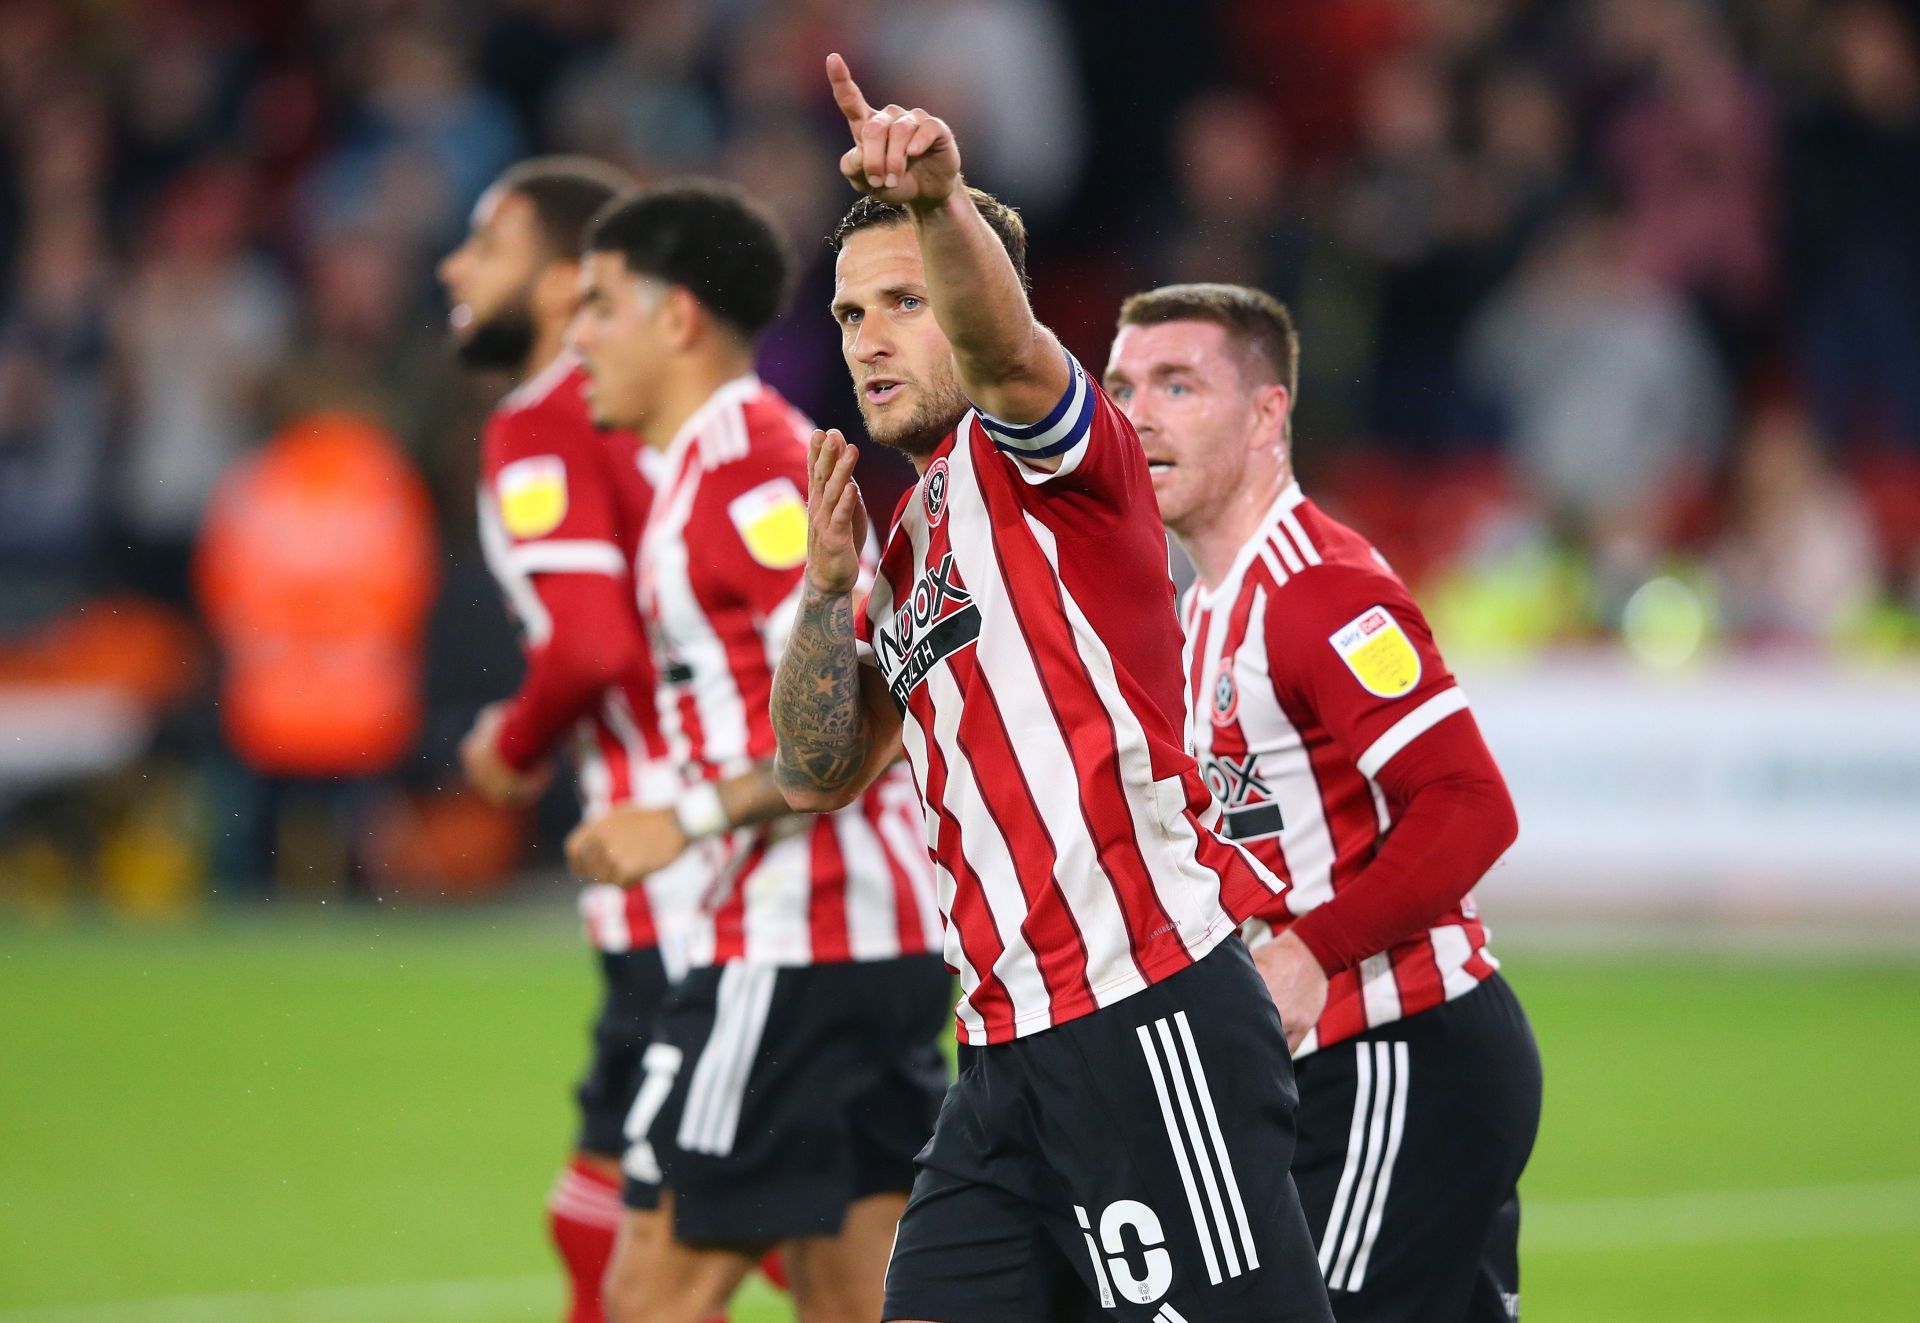 Sheffield United will be looking to win the game